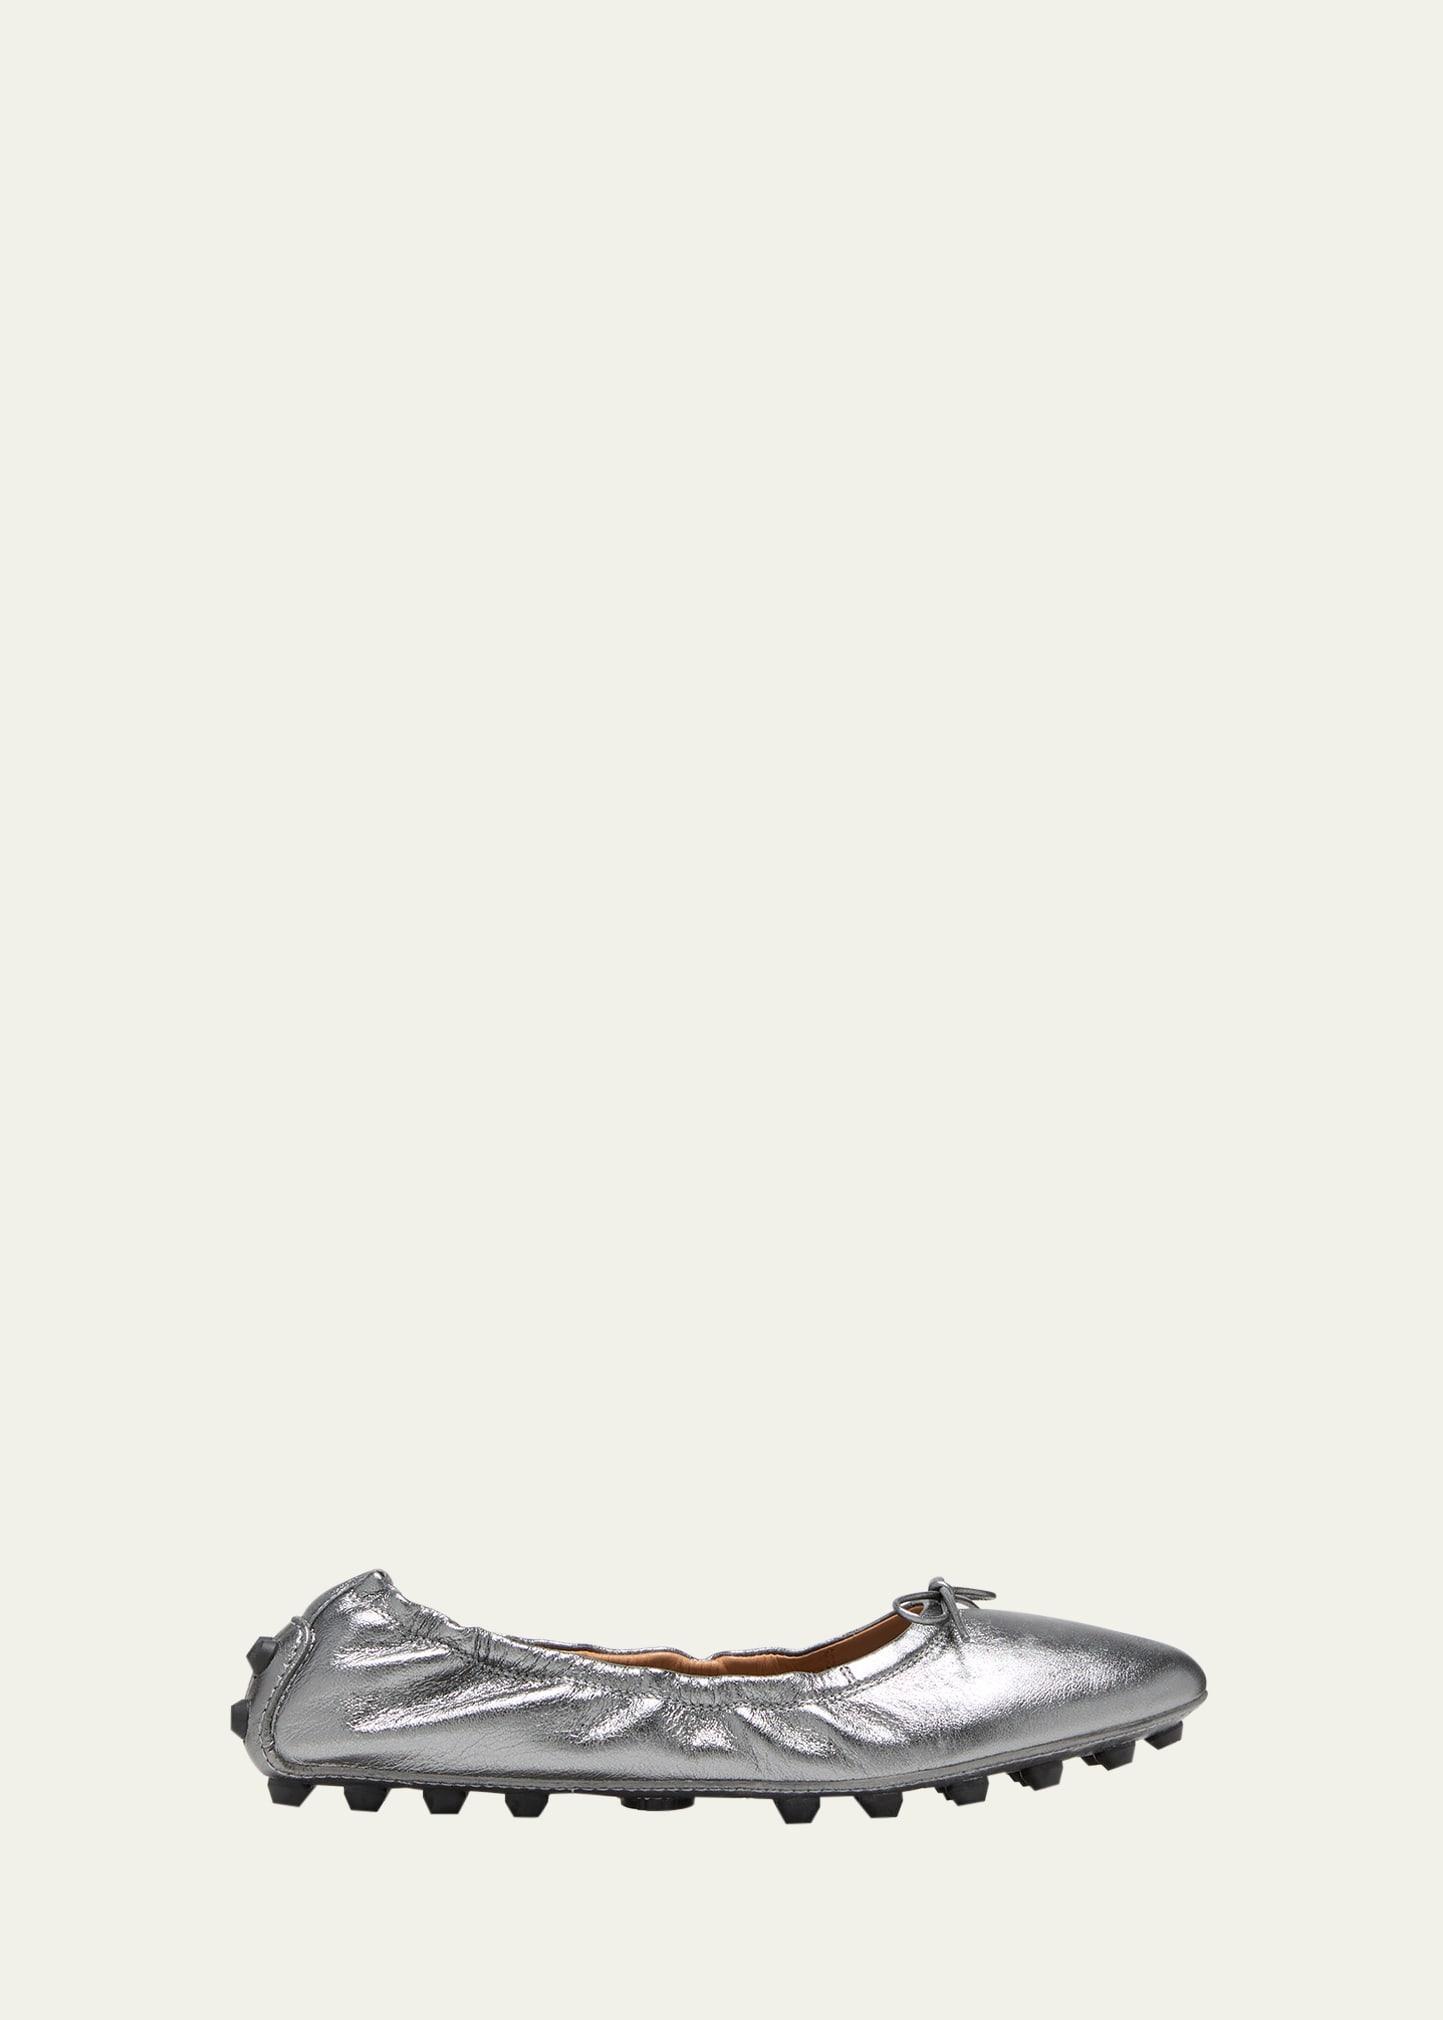 Tods Bubble Bow Ballet Flat Product Image